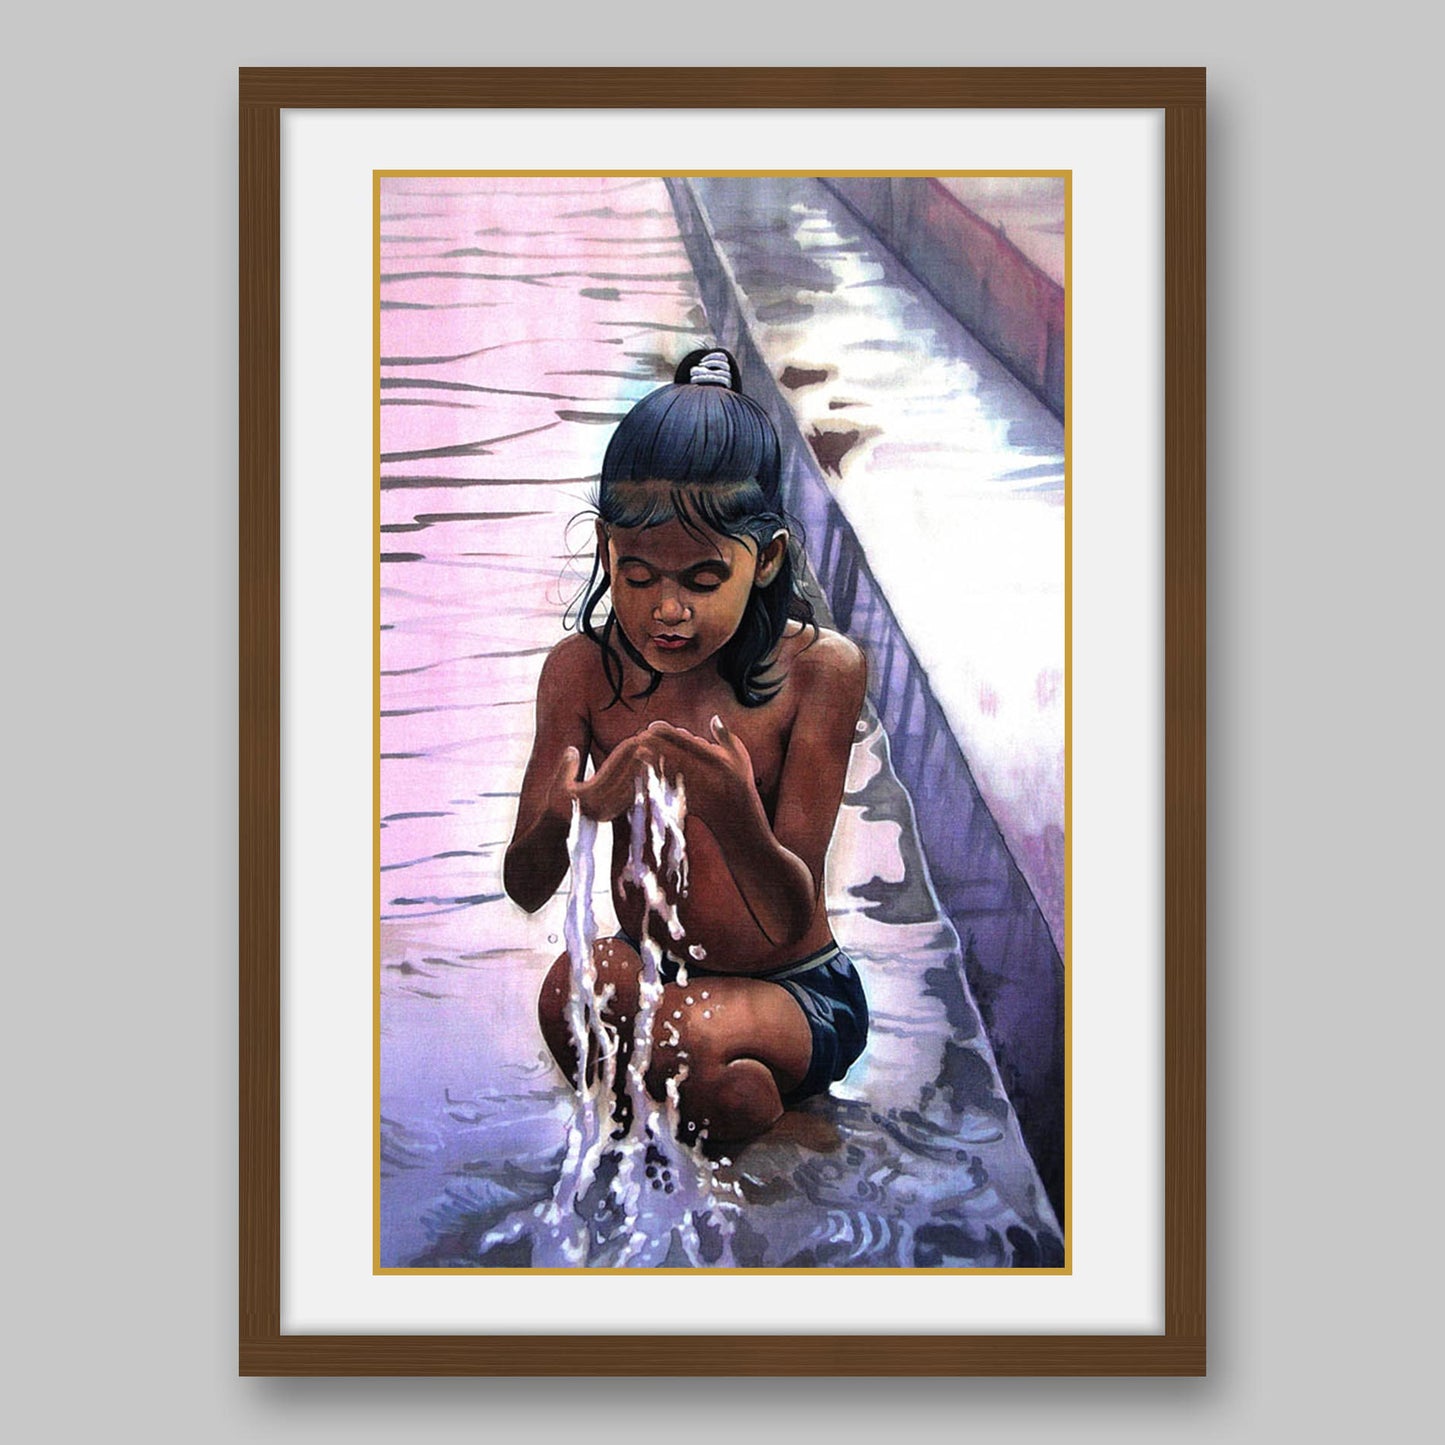 Girl Taking Sacred Dip in Holy River – High Quality Print of Artwork by Pieter Weltevrede